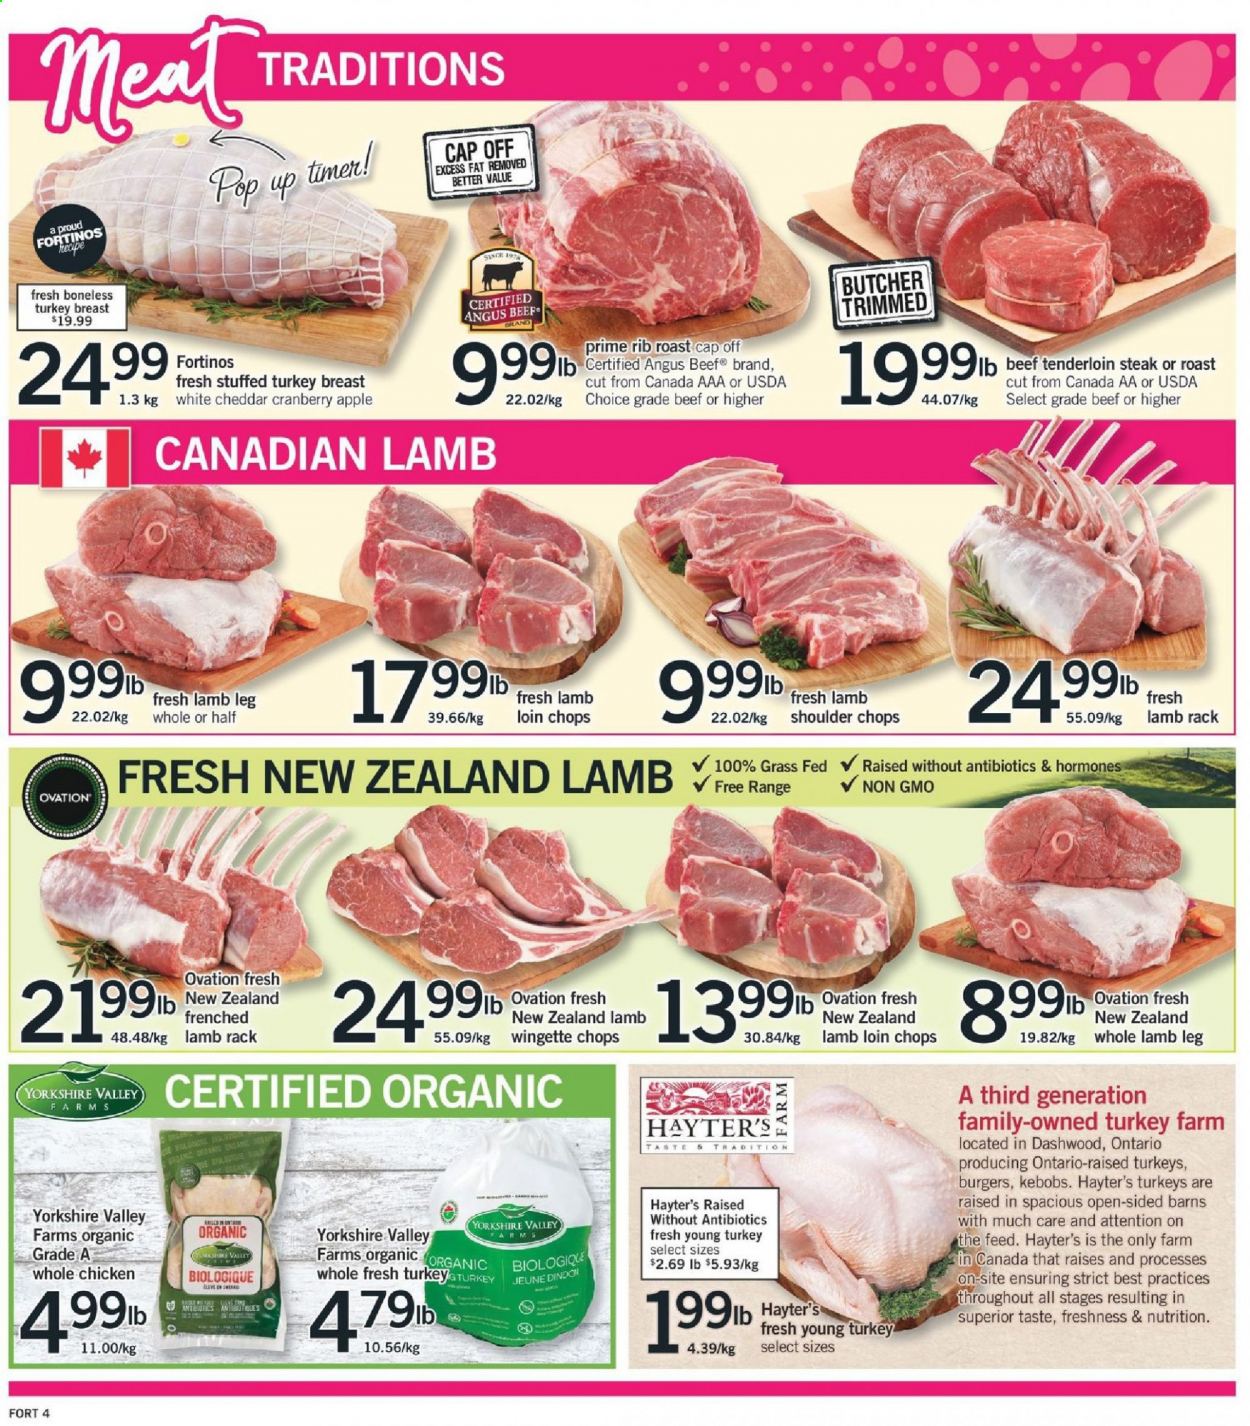 thumbnail - Fortinos Flyer - March 25, 2021 - March 31, 2021 - Sales products - Apple, hamburger, cheddar, cheese, turkey breast, whole chicken, chicken, turkey, beef meat, beef tenderloin, lamb loin, lamb meat, lamb shoulder, whole lamb, lamb leg, cap, steak. Page 4.